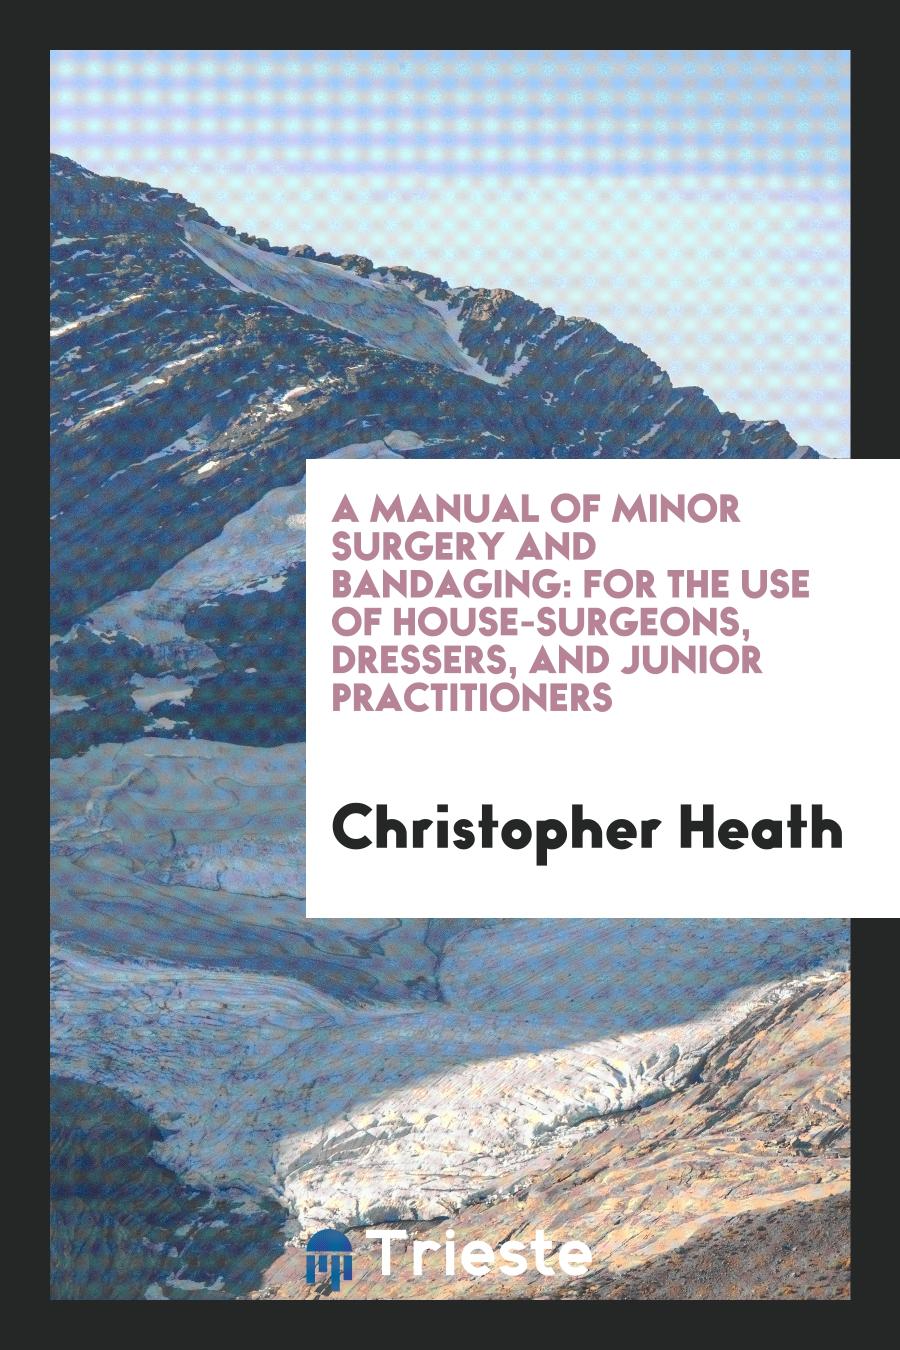 A Manual of Minor Surgery and Bandaging: For the Use of House-Surgeons, Dressers, and Junior Practitioners